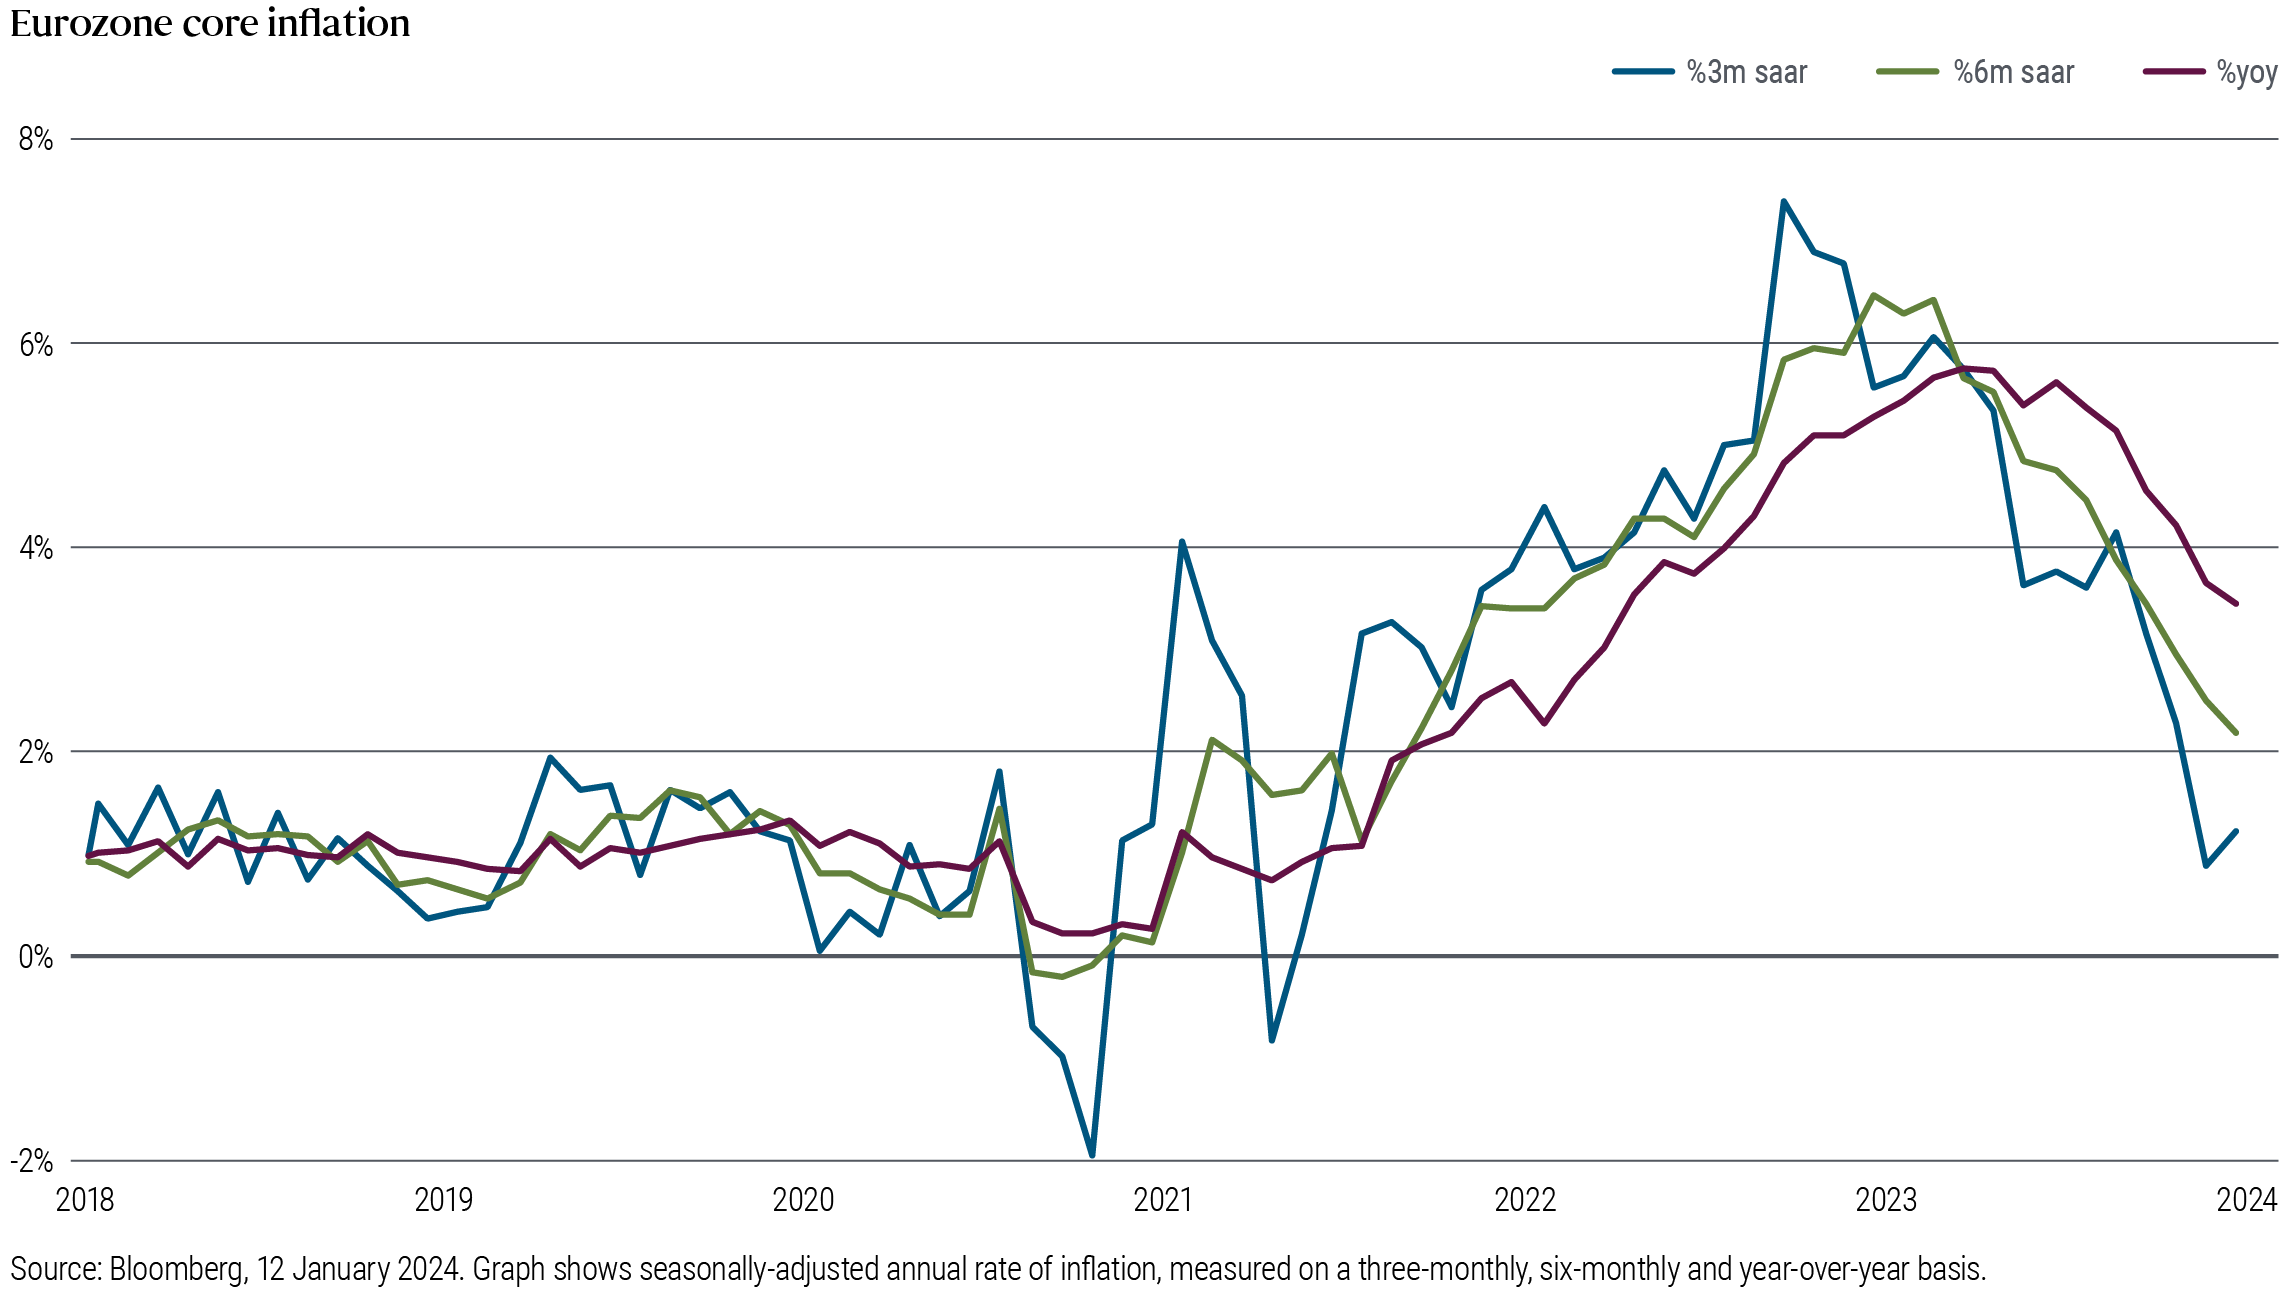 Graph shows seasonally-adjusted annual rates of core inflation (i.e., inflation excluding food and energy) as of 12 January2024, measured on a three-month, six-month, and year-over-year basis. The main takeaway is that that the three-month-over-three-month inflation is now lower than the other measures.